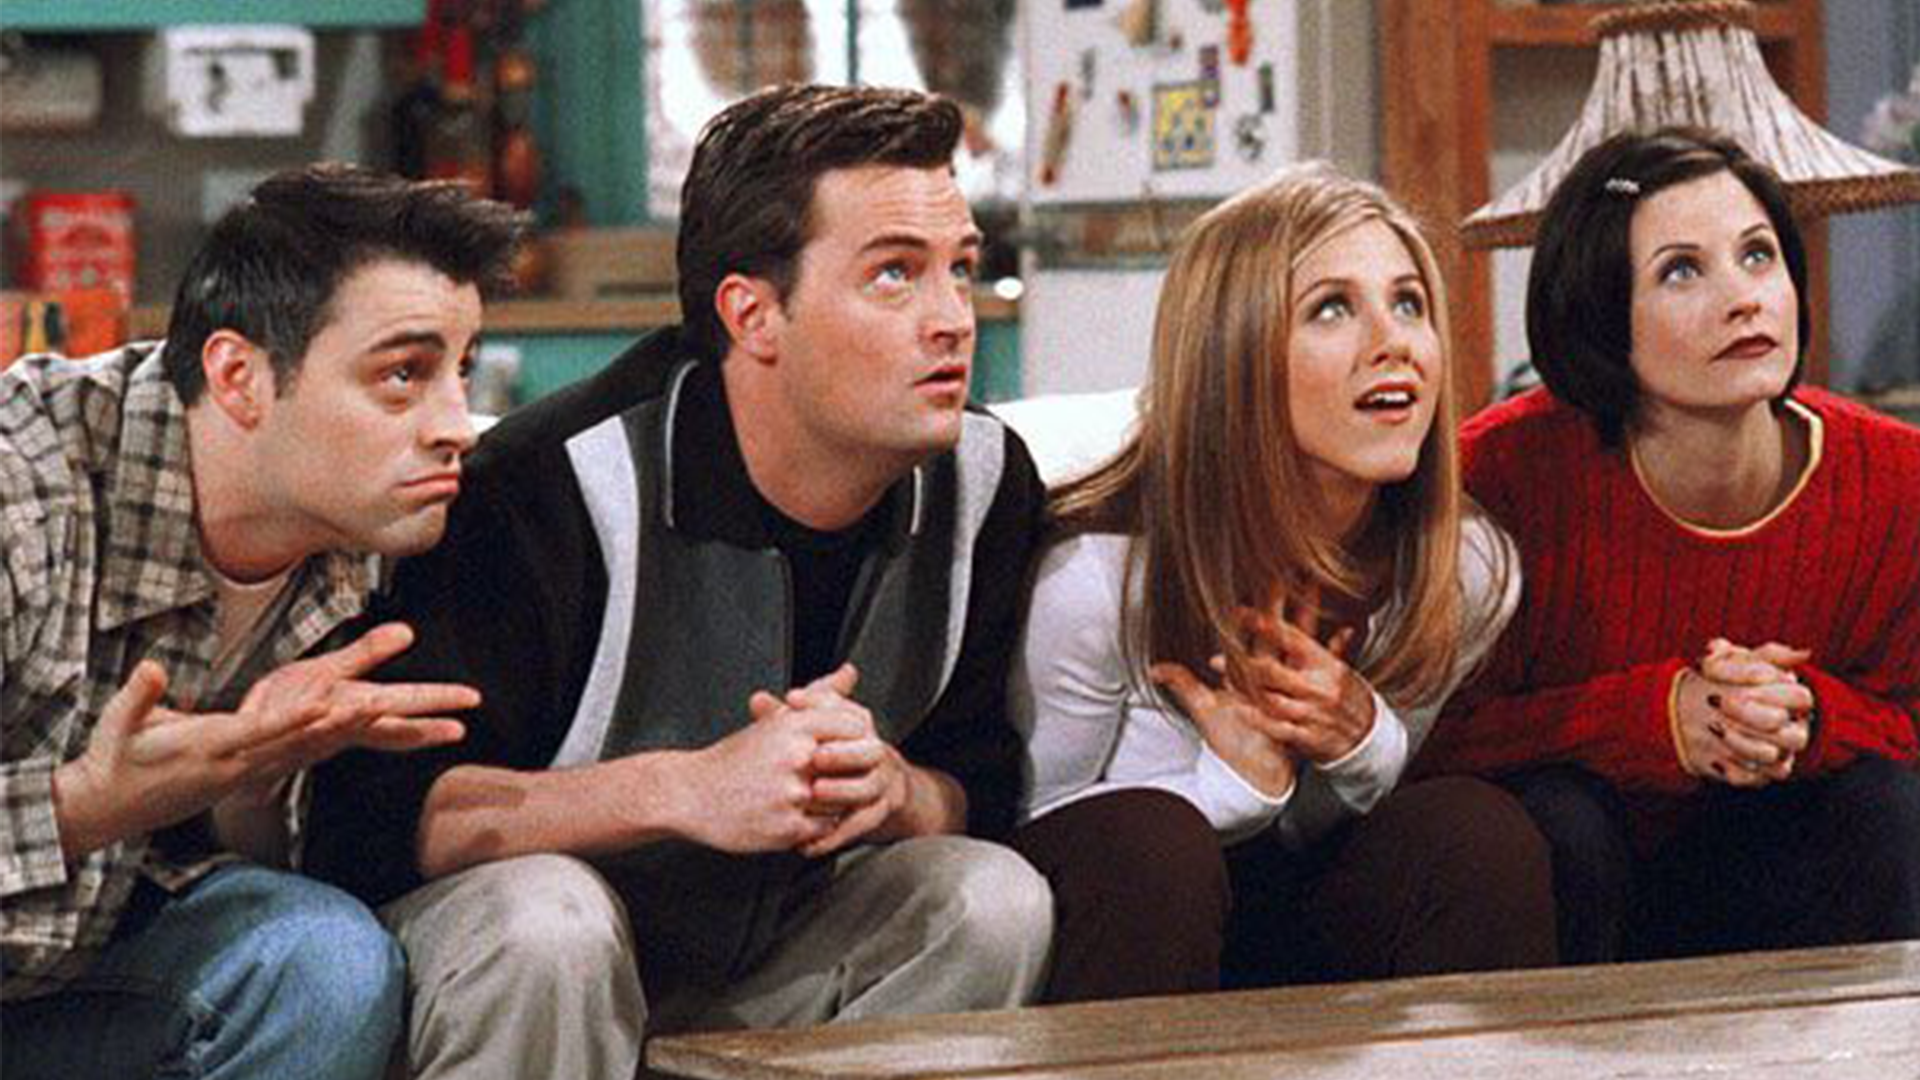 A scene from Friends featuring Joey, Chandler, Rachel and Monica 